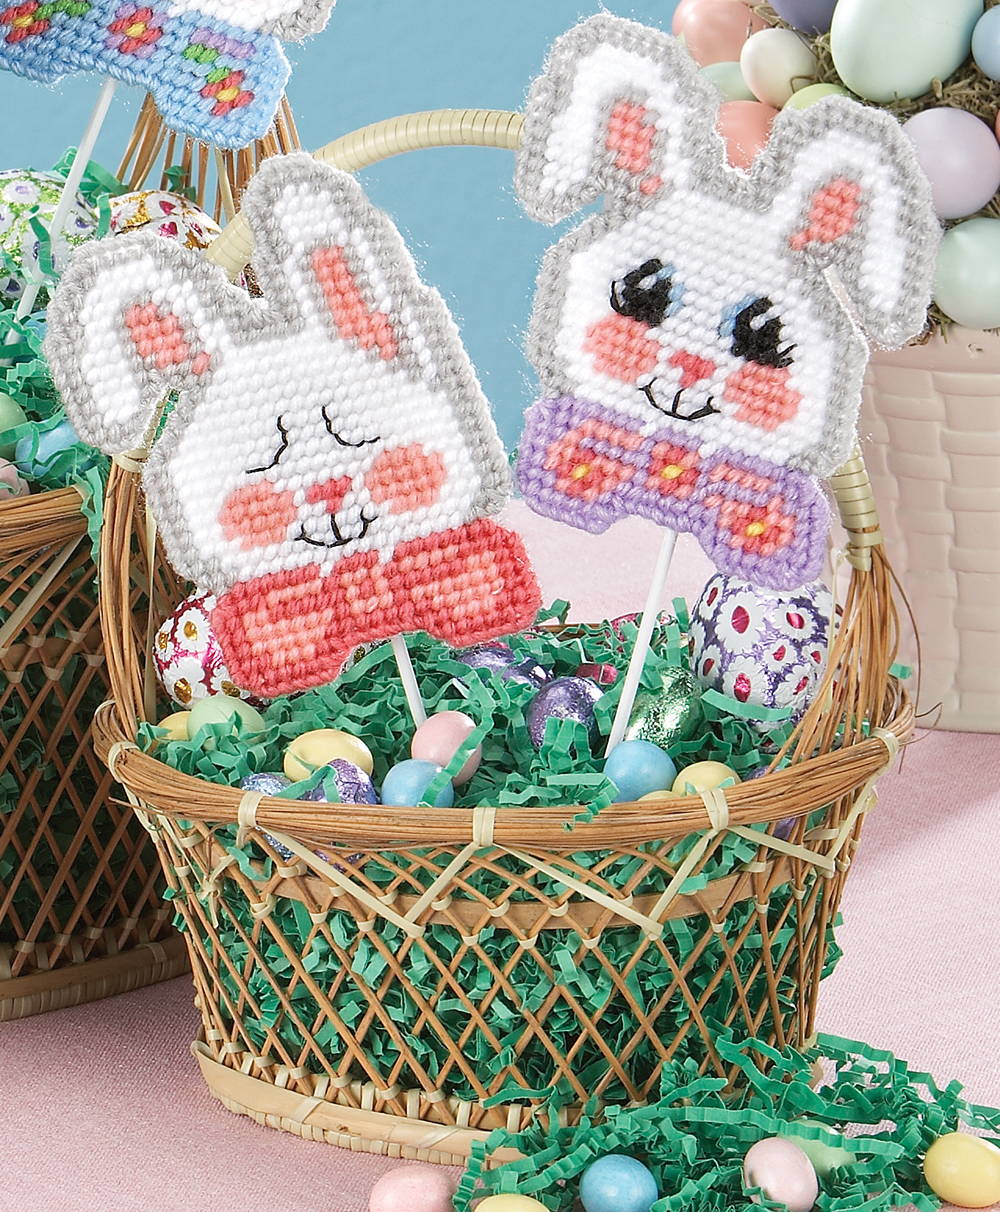 Plastic canvas bunnies in an Easter basket